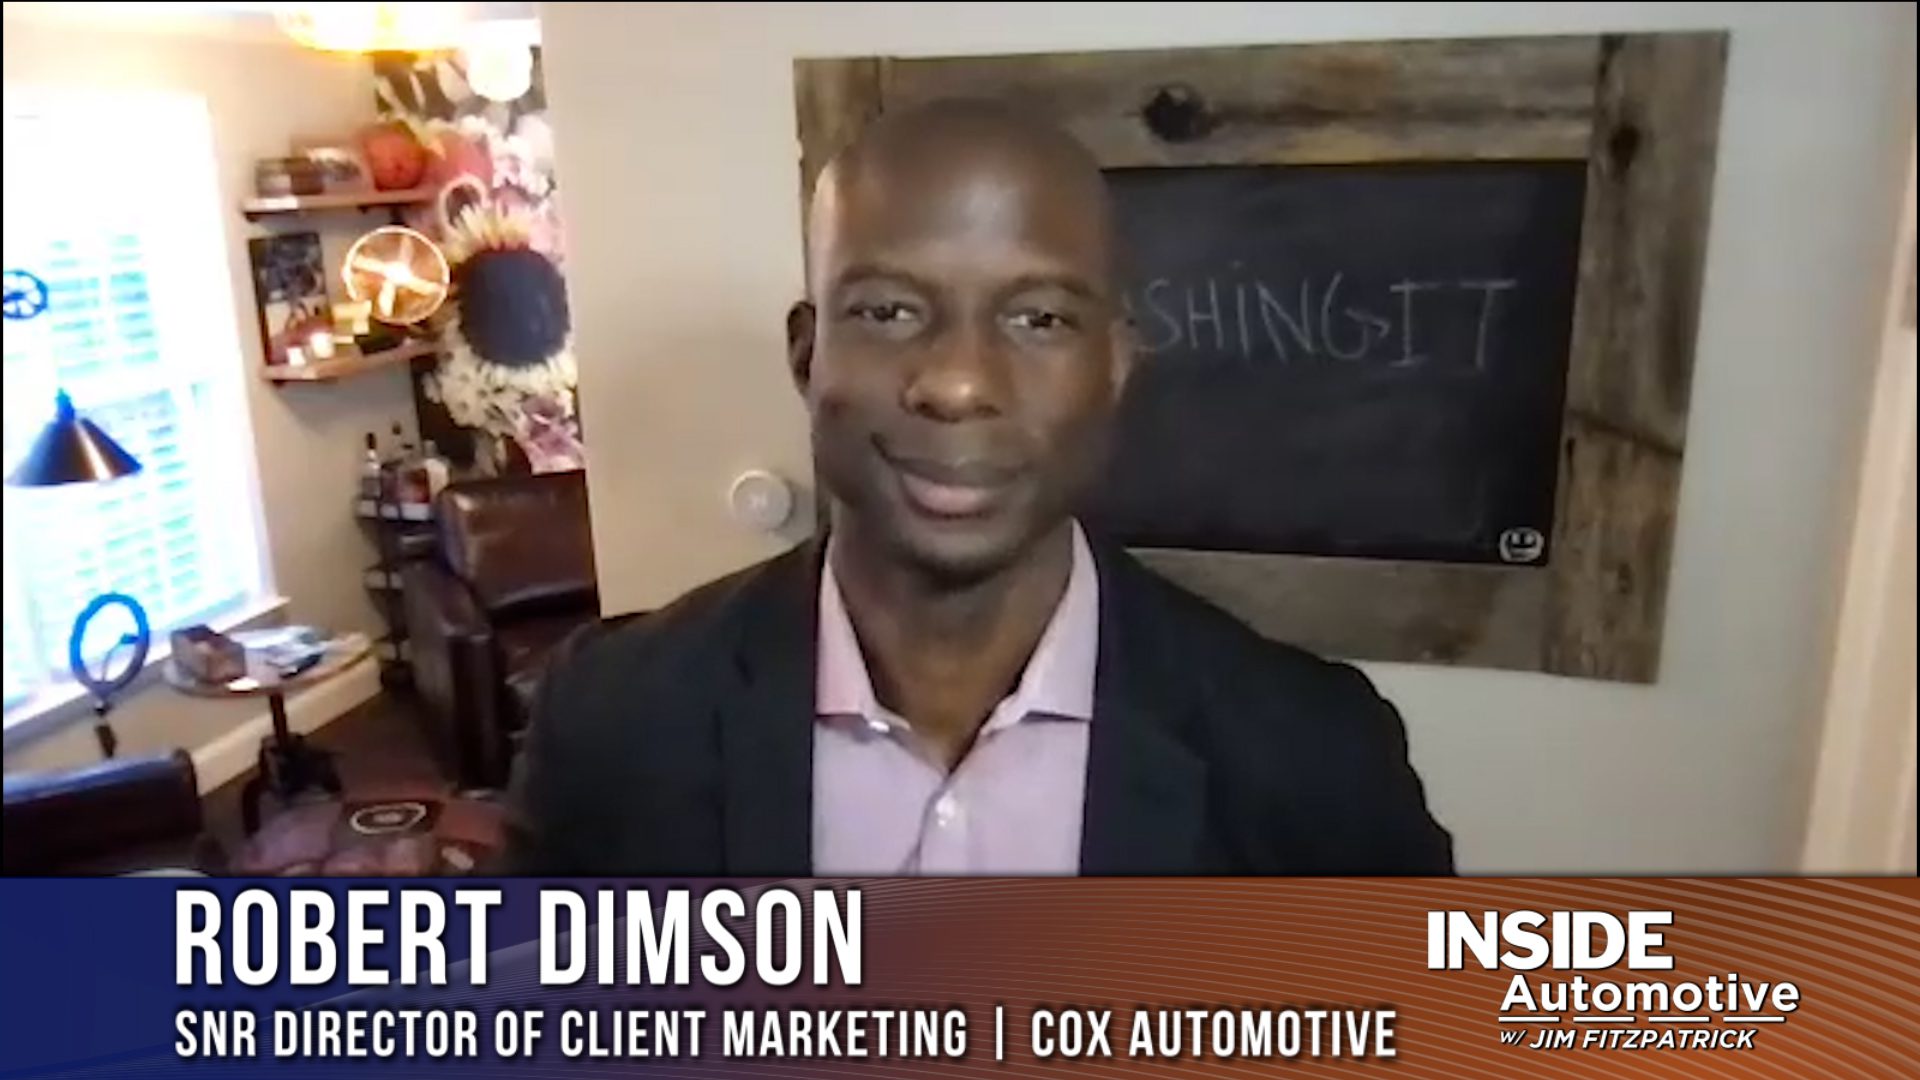 How to make the most of your car dealership’s digital marketing opportunities – Robert Dimson